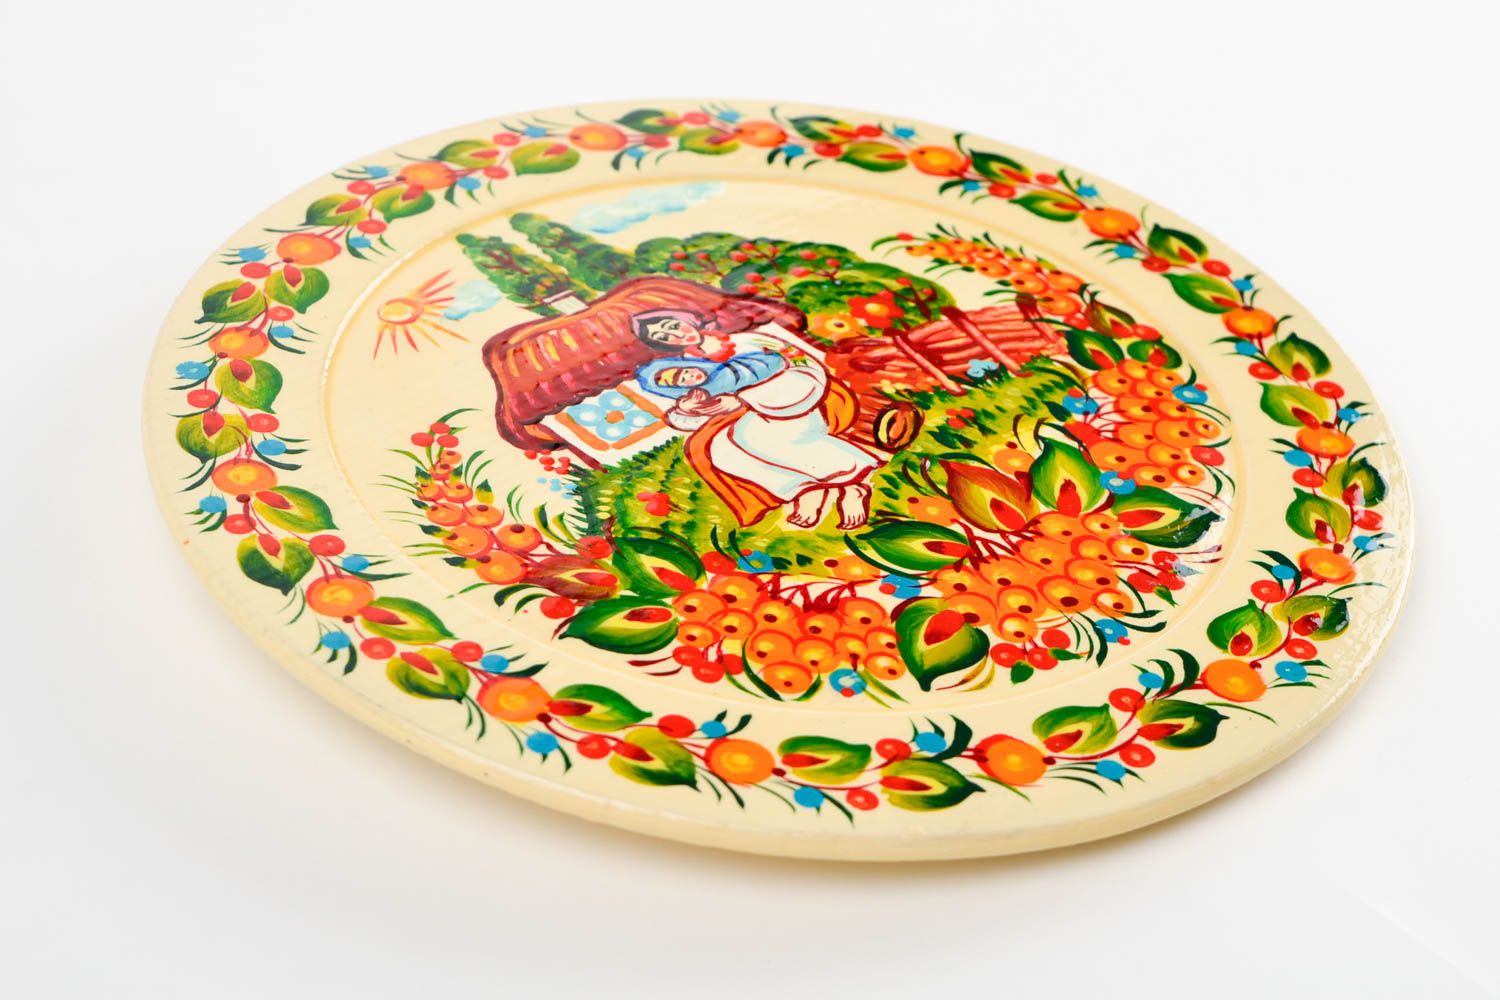 Decorative plate handmade wooden plate for decorative use only wooden gifts photo 3